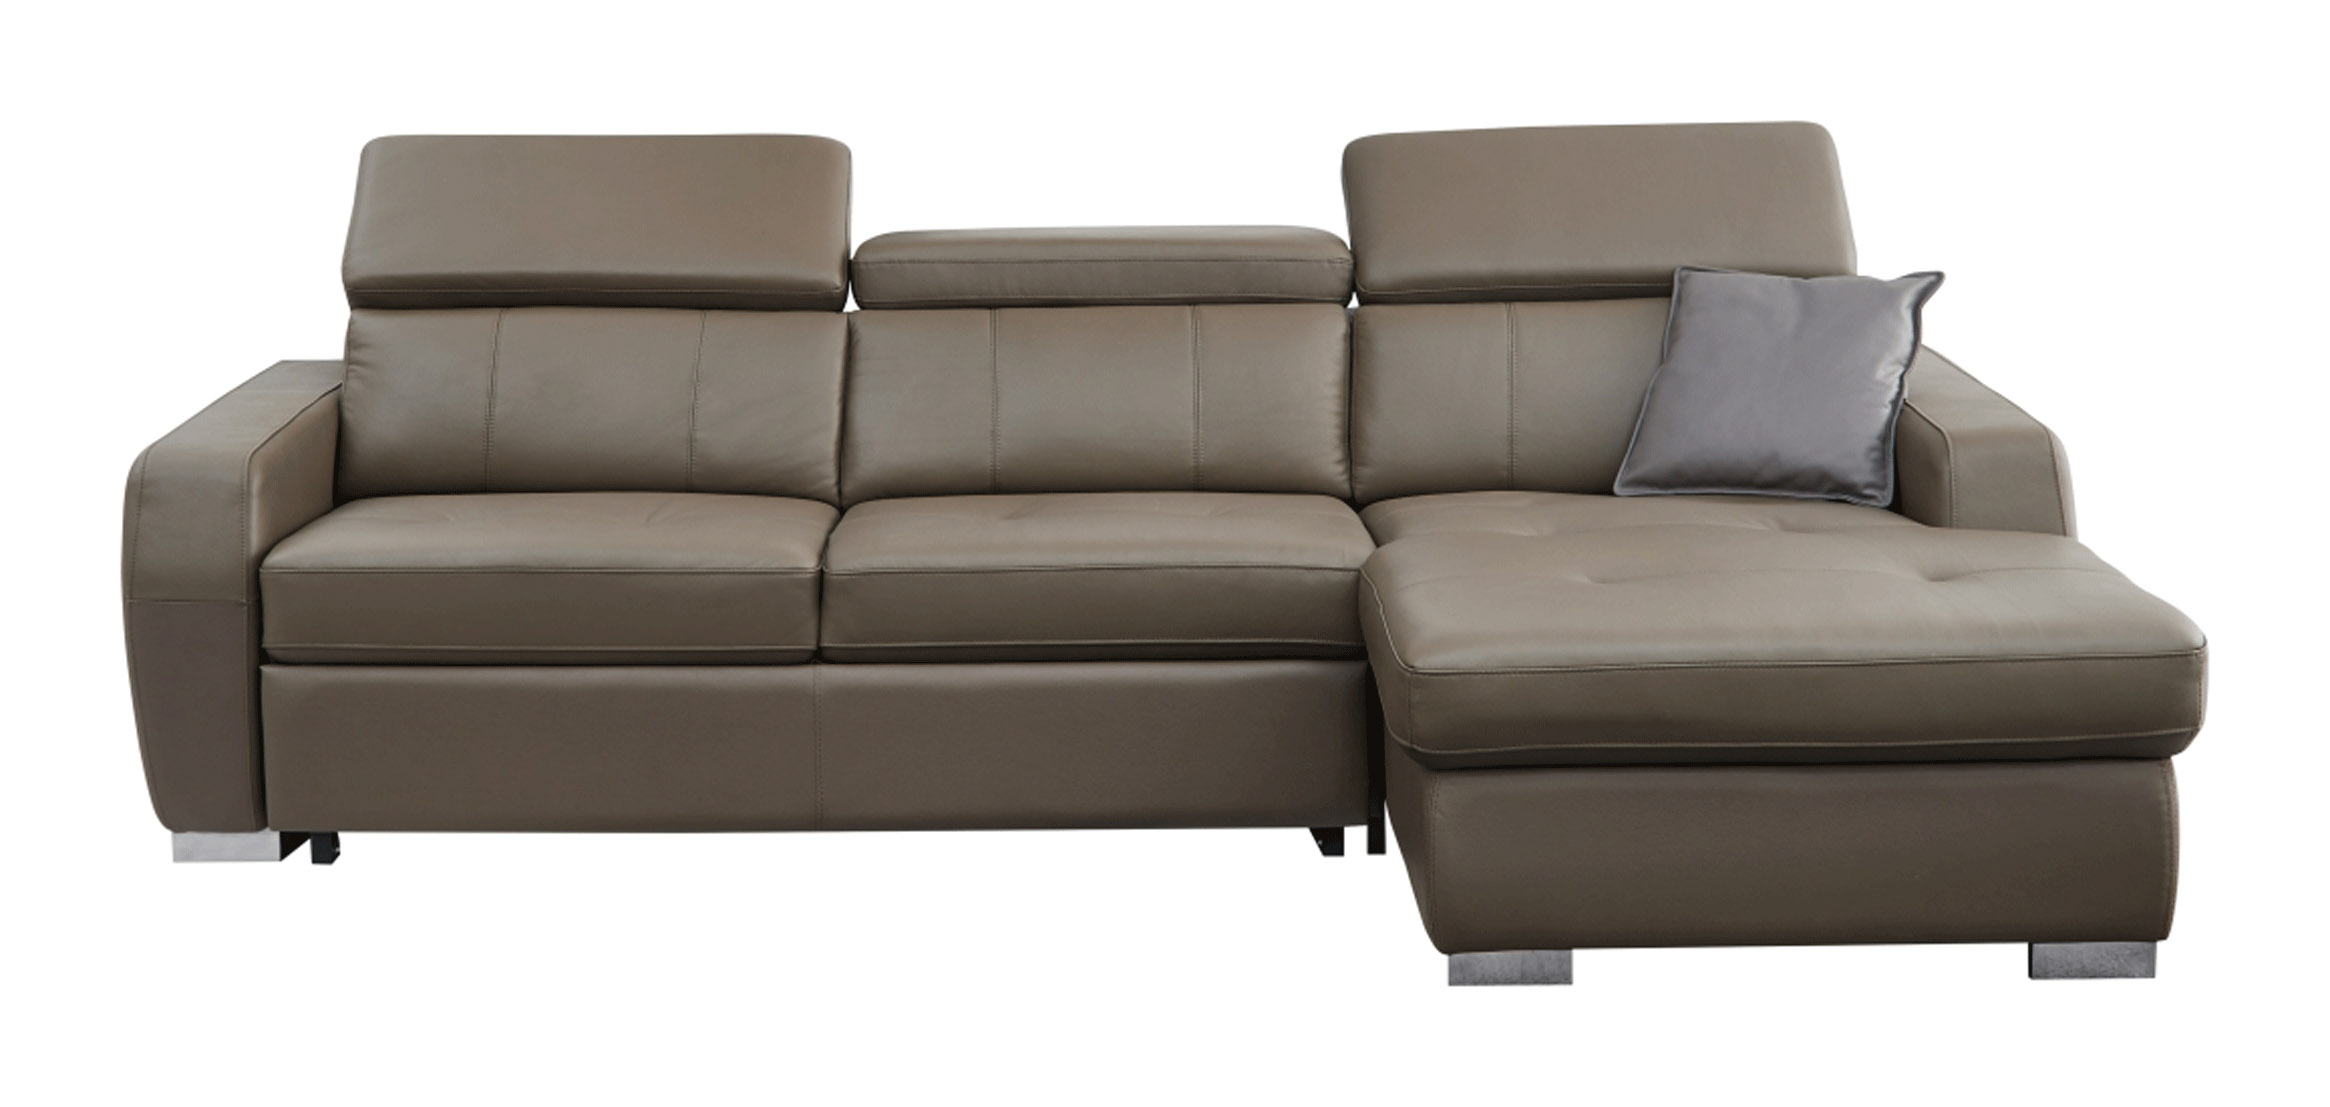 Stylish Sectional with Chrome Legs High Quality Leather - Click Image to Close